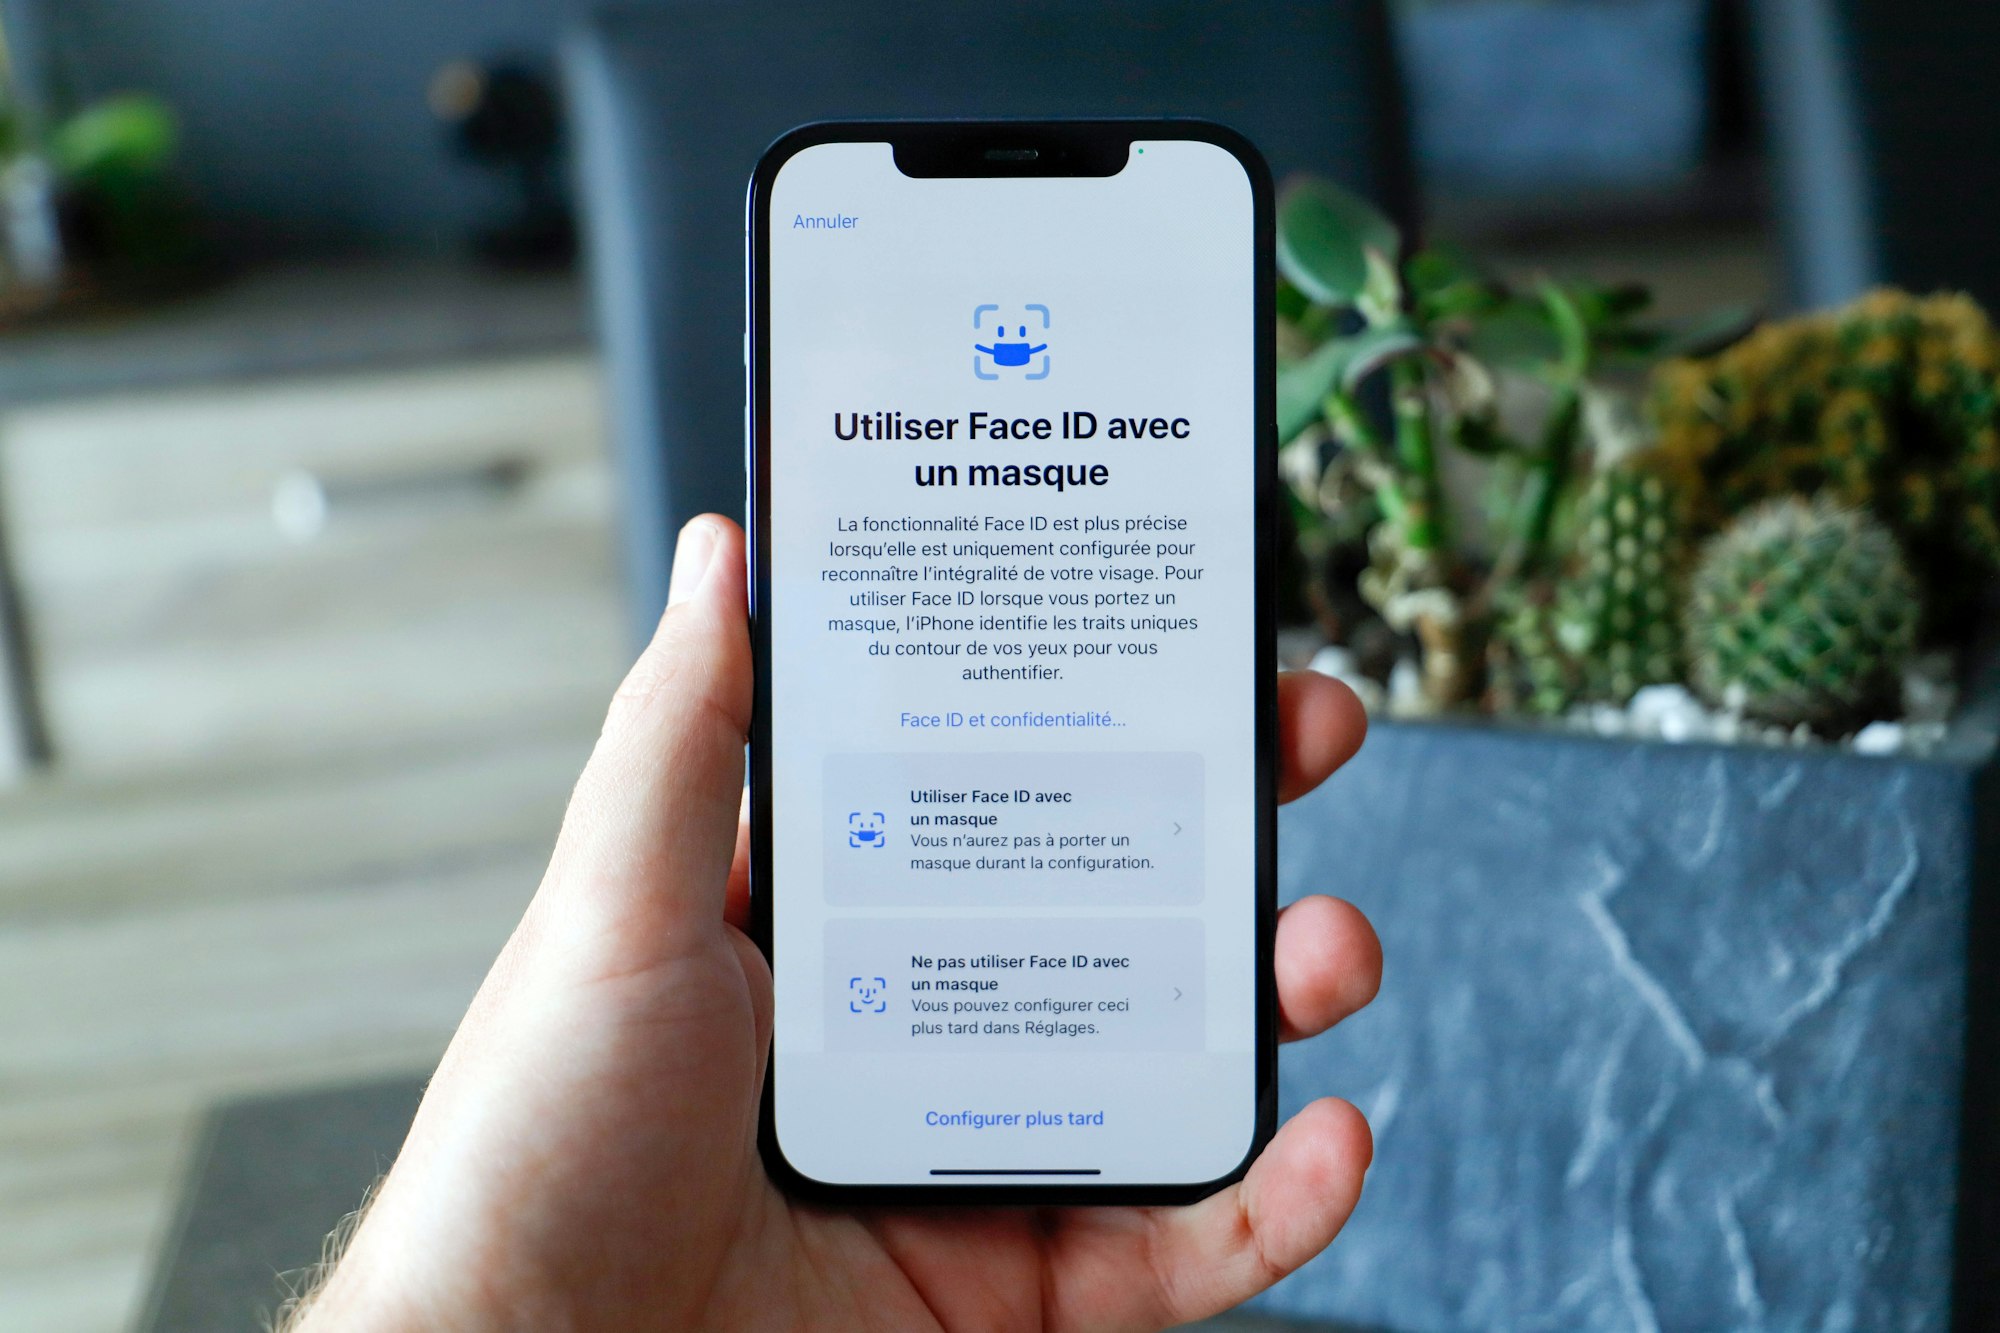 How to Set Up Face ID on an iPhone